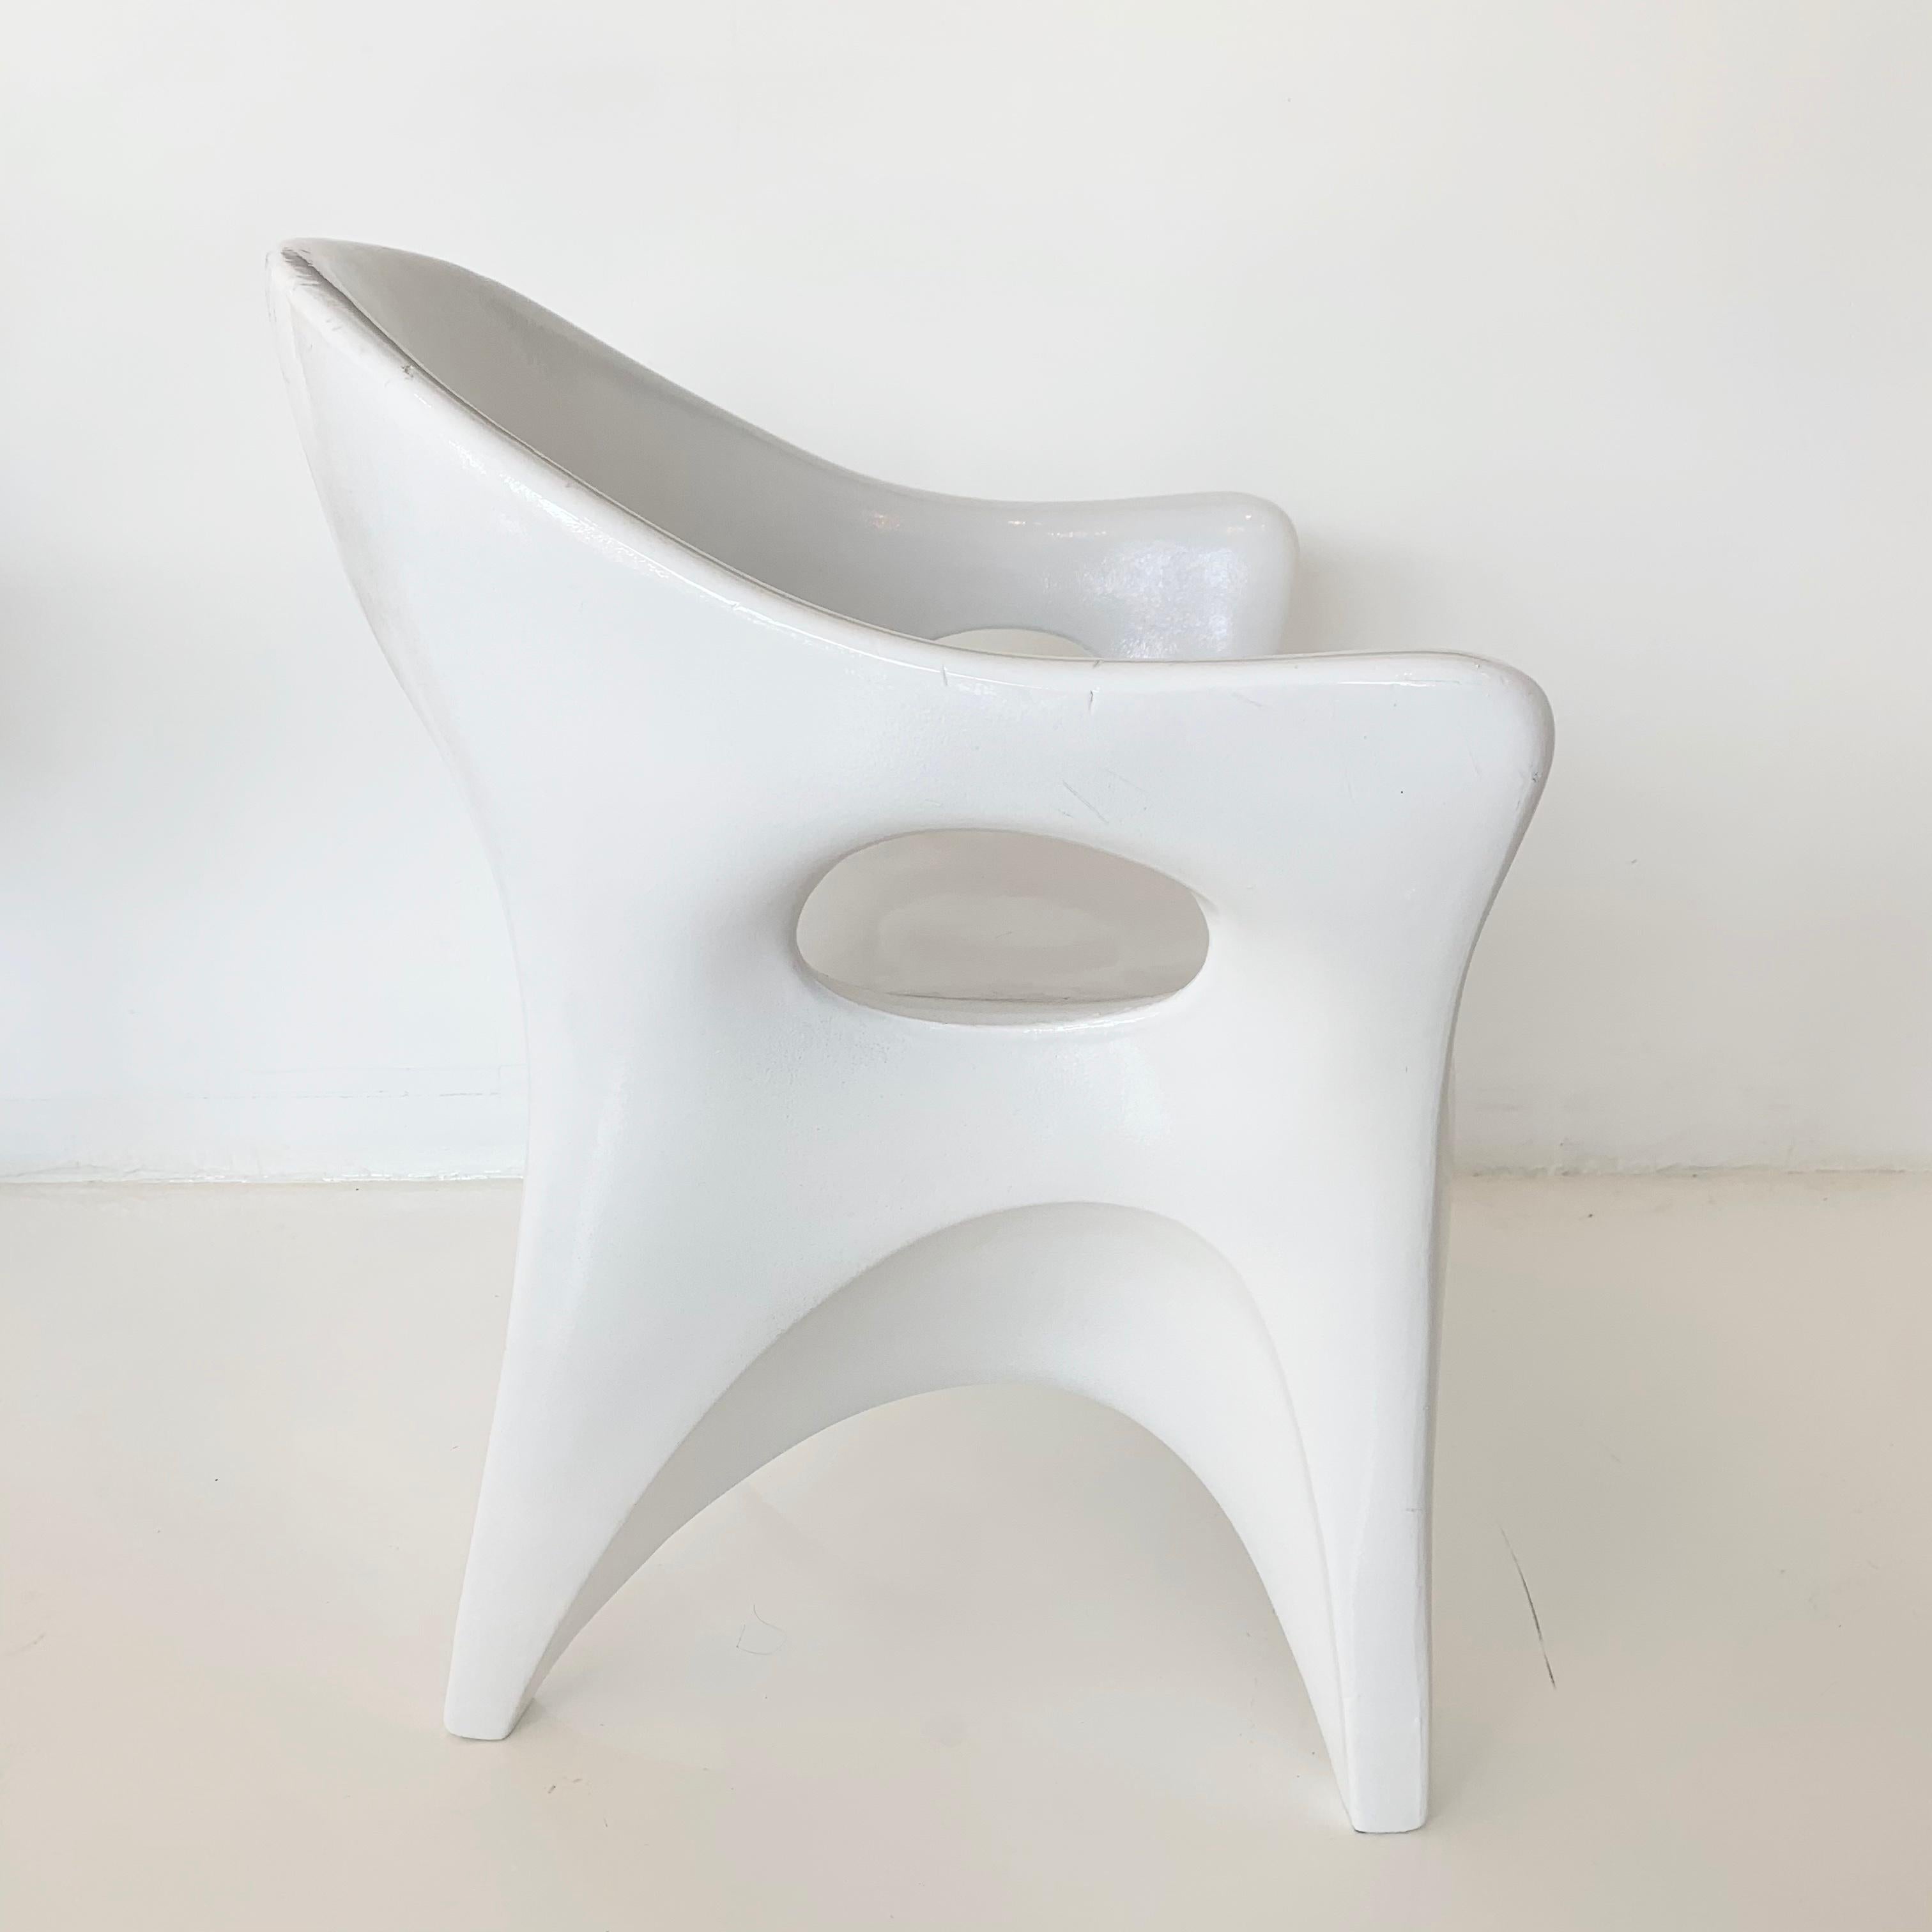 Set of 4 Sculptural Plastic Chairs by John Gale, 1963 For Sale 4